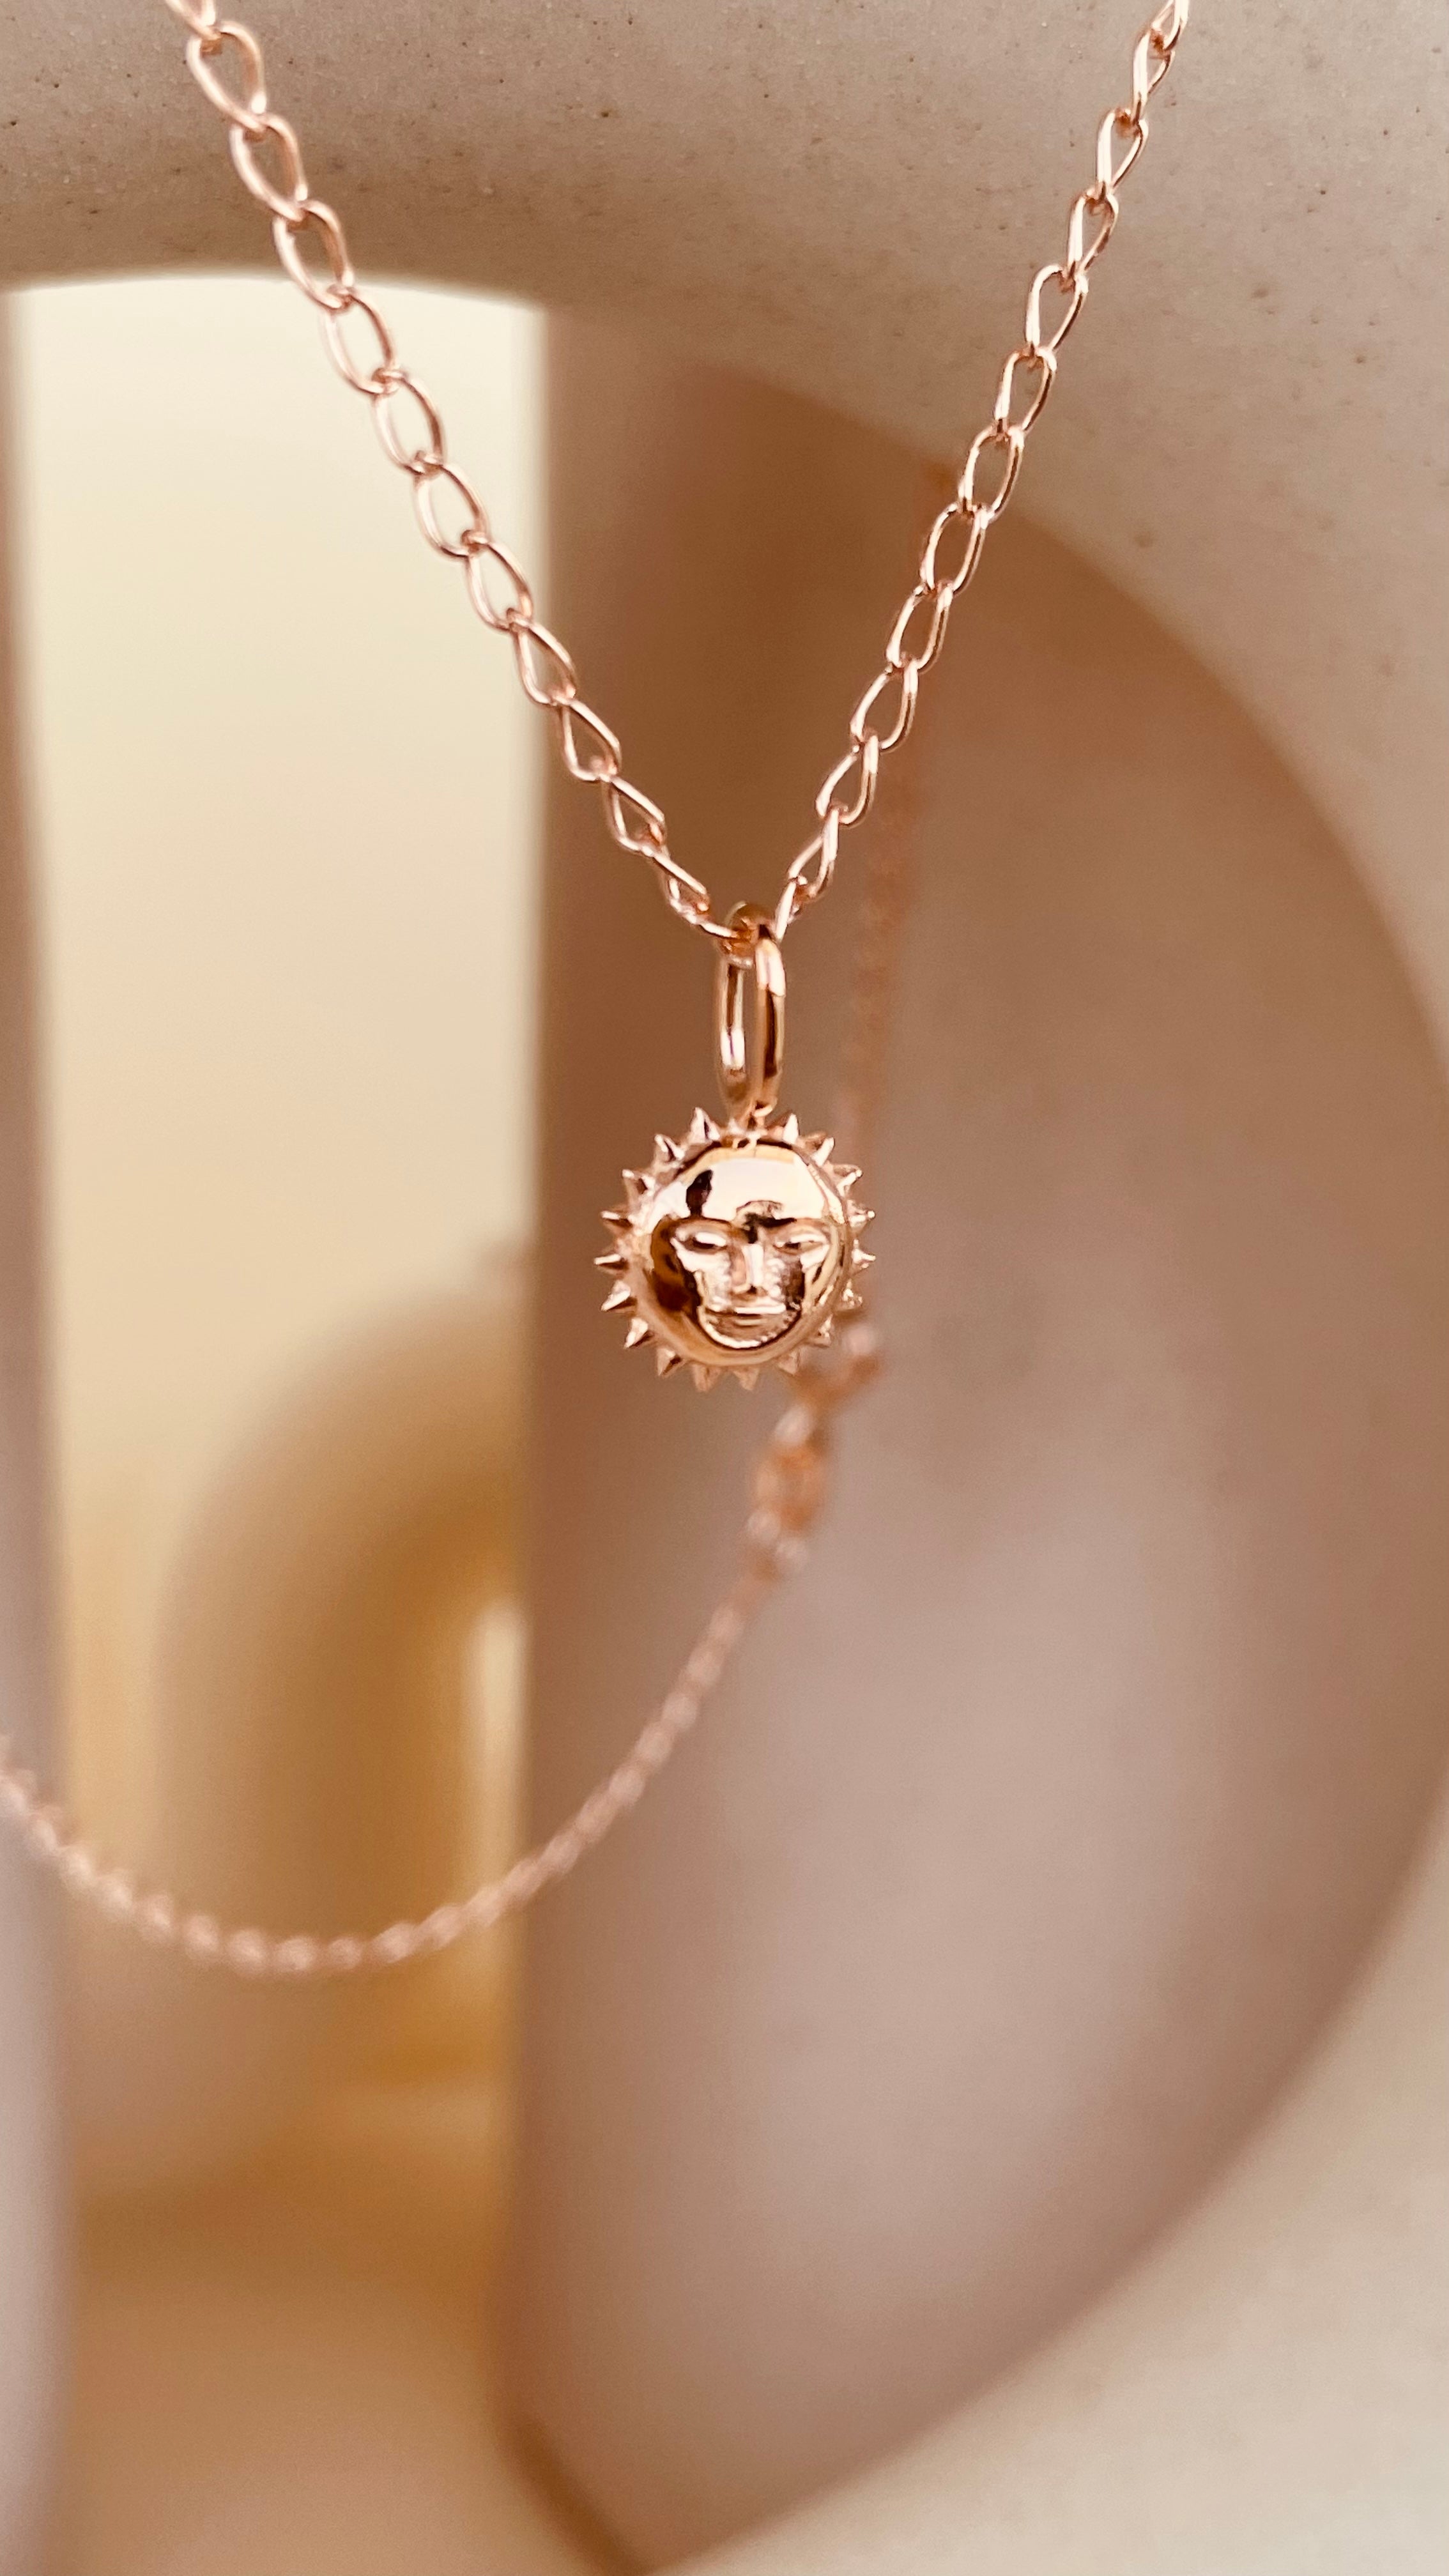 Dainty Steller Sun Charm Necklace with Cable Chain - Octonov 